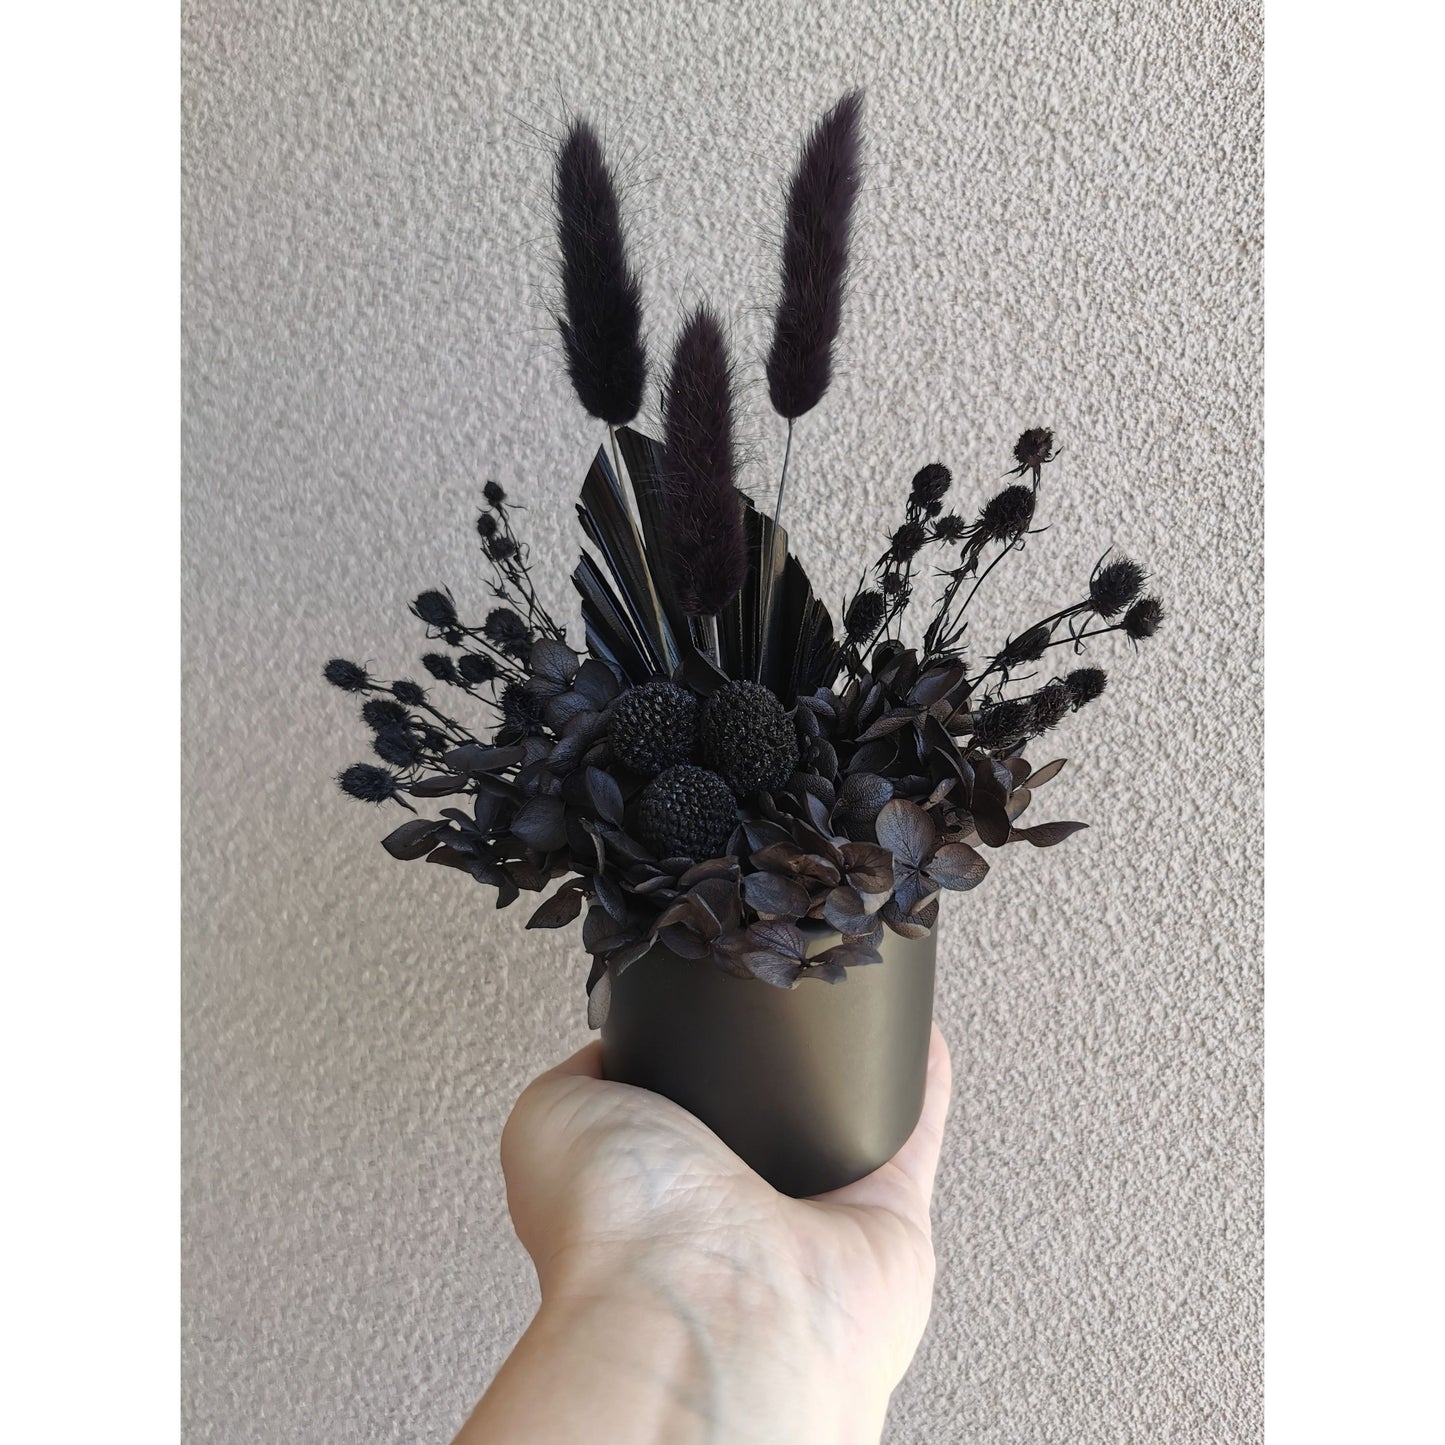 Dried flower arrangement with all black flowers in a black ceramic pot. Photo shows arrangement being held by hand against a blank wall